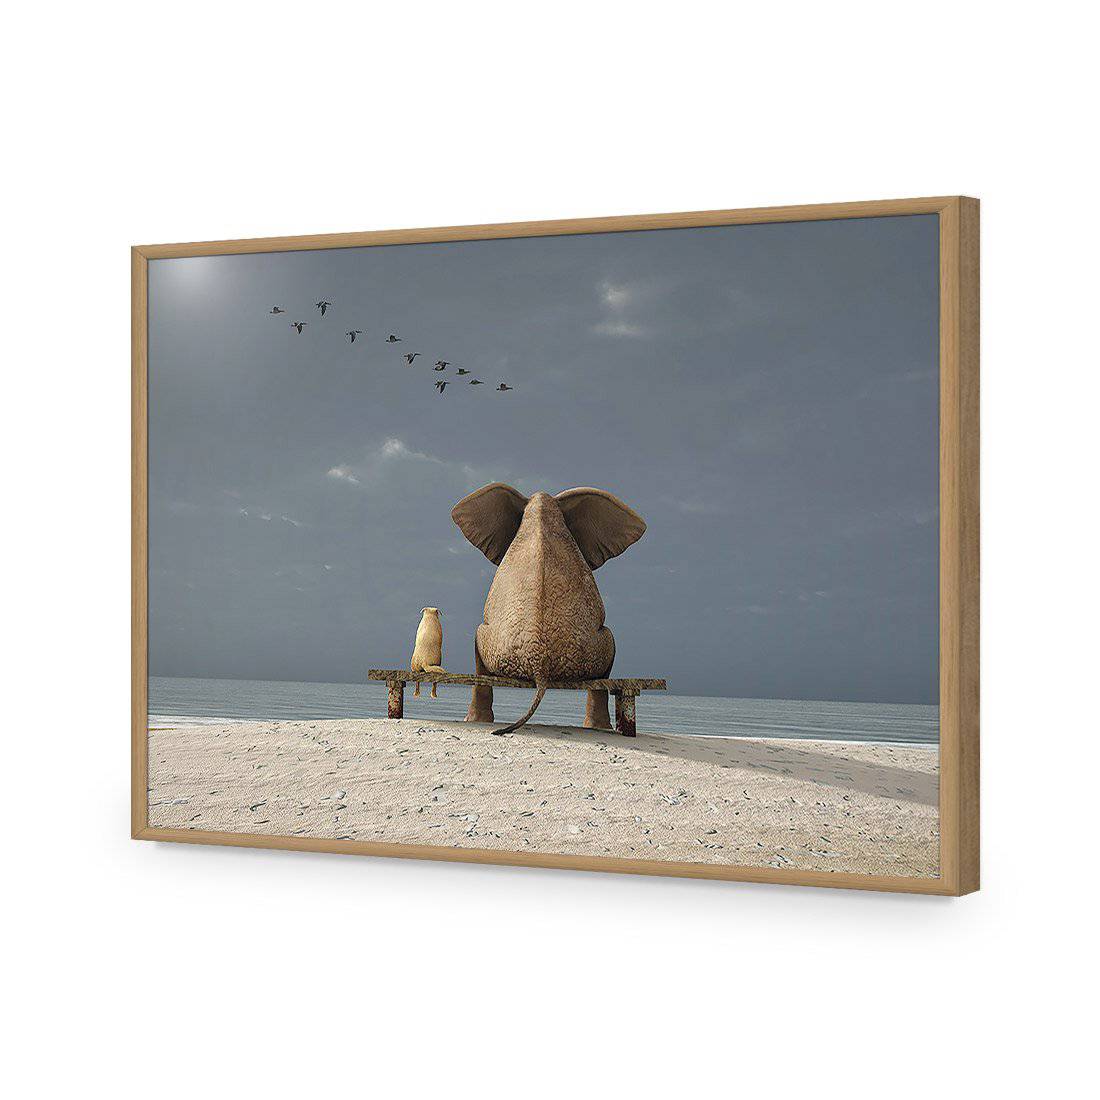 Little And Large-Acrylic-Wall Art Design-Without Border-Acrylic - Oak Frame-45x30cm-Wall Art Designs